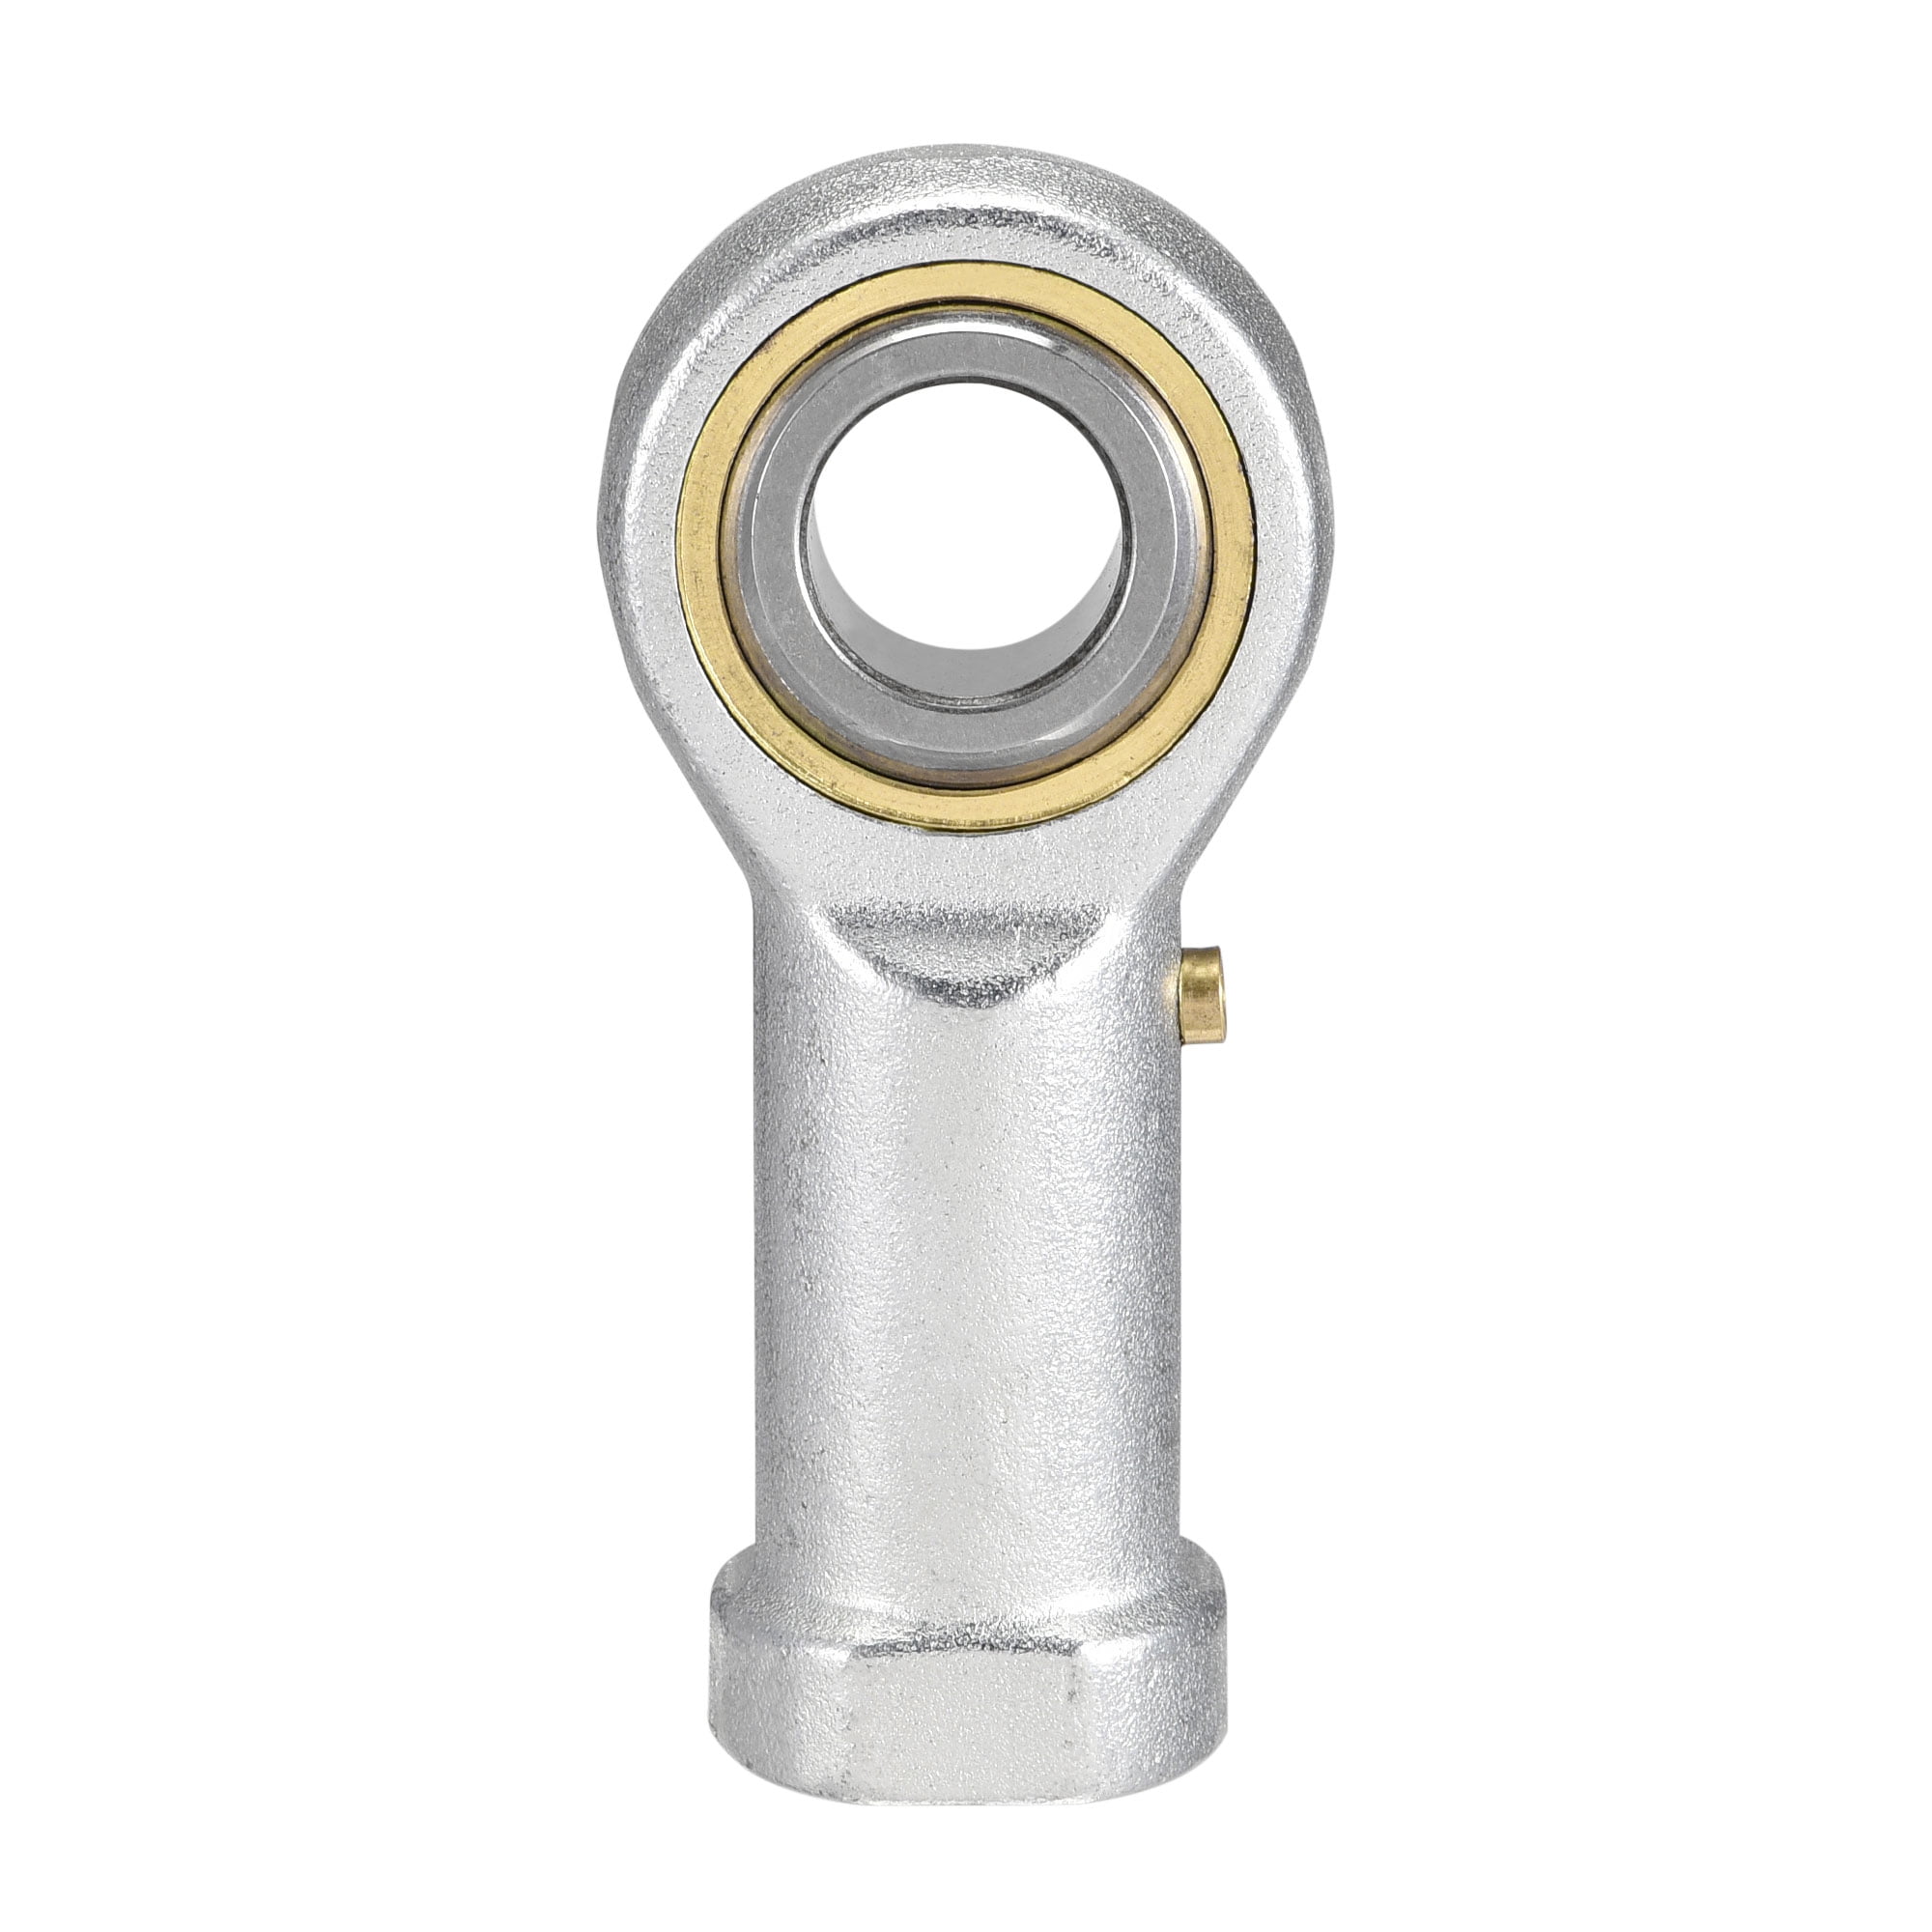 uxcell PHSB12 Rod End Bearing 3/4-inch Bore Pre-Lubricated Bearing 3/4-16 Female Thread Left Hand 